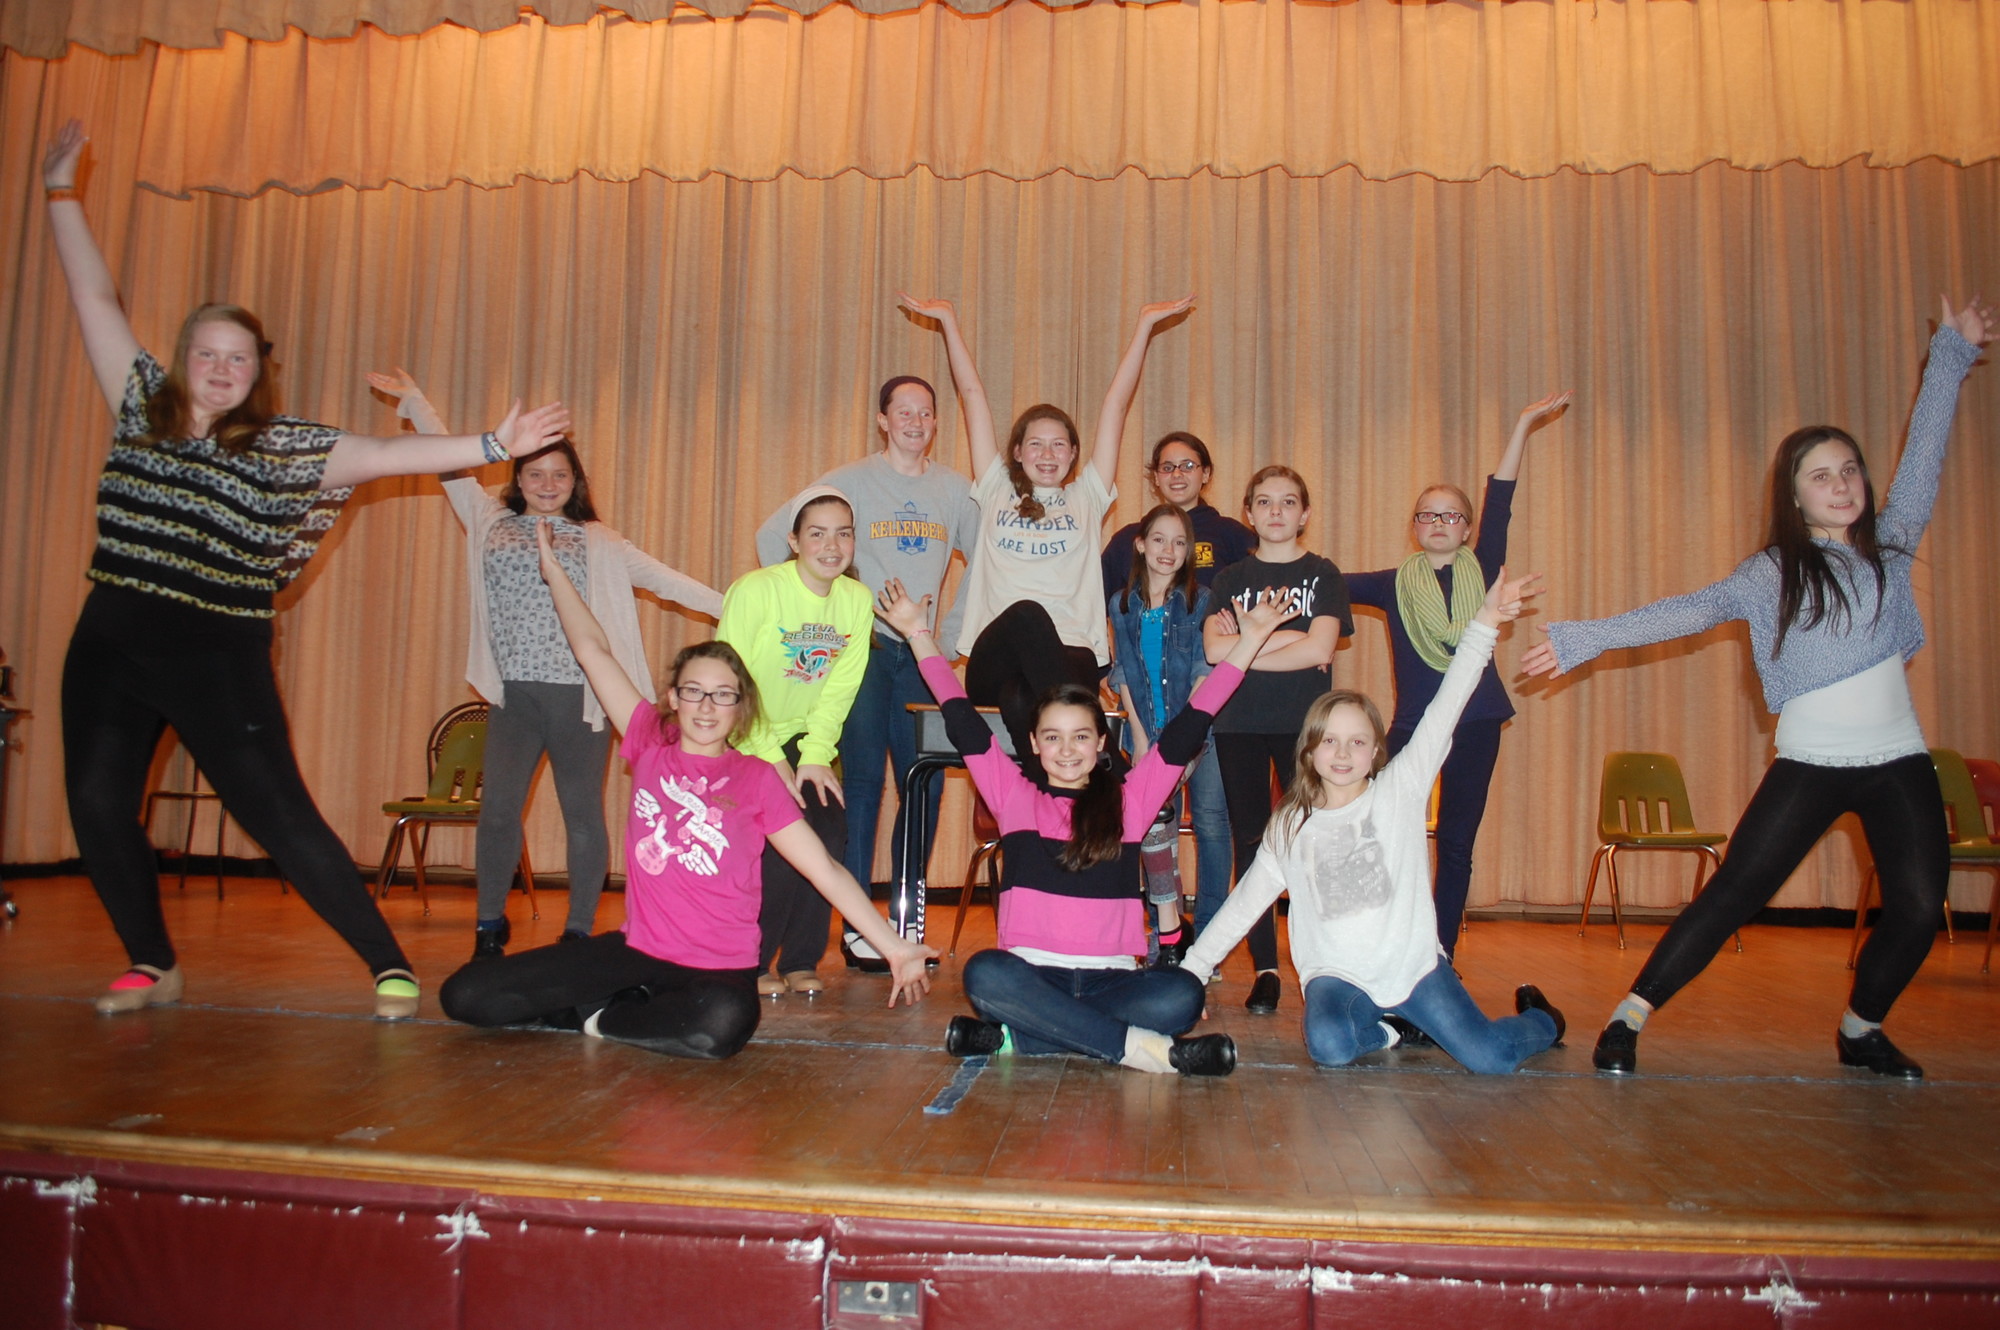 The cast of “Thoroughly Modern Millie” rehearses a musical number for the upcoming production at St. William the Abbot School.